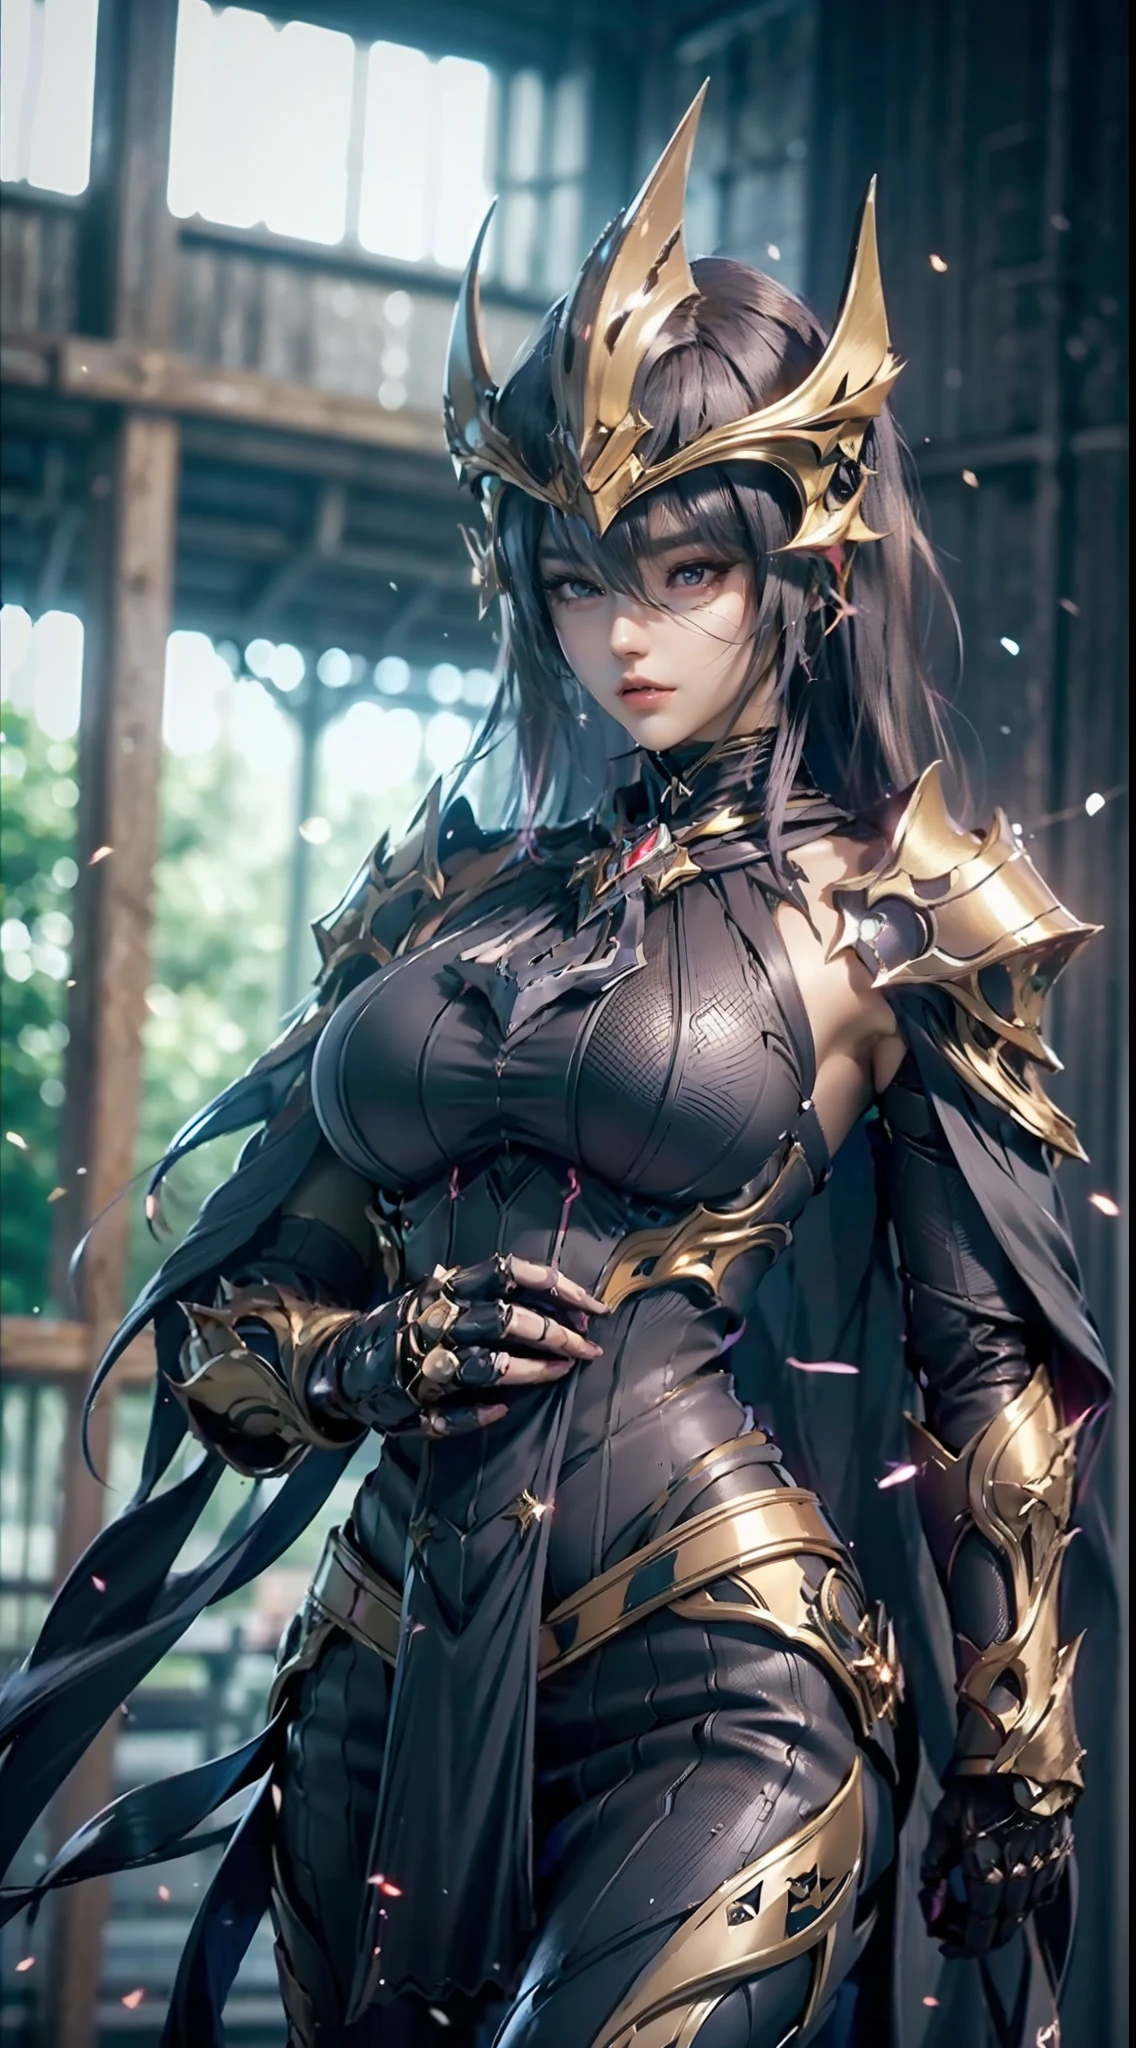 ((unreal enginee 5)), lifelike rendering, excellent, (Full Armor Body), (cloaks), (Helm), looking in camera, Stand in the studio, Beautiful face, makeup, CGI Mix, (Photorealism:1.2), Ultra-realistic UHD face, (Colossal tits), Slim waist, an hourglass figure, Half body, ((Glowing skin)), ((Shiny skin)), Realistic body, ((She has a sexy body)), ((Clean skin)), Photorealistic, Bokeh, Motion Blur, masutepiece, hight resolution, 1080p, Super Detail, Textured skin, (sword on waist)